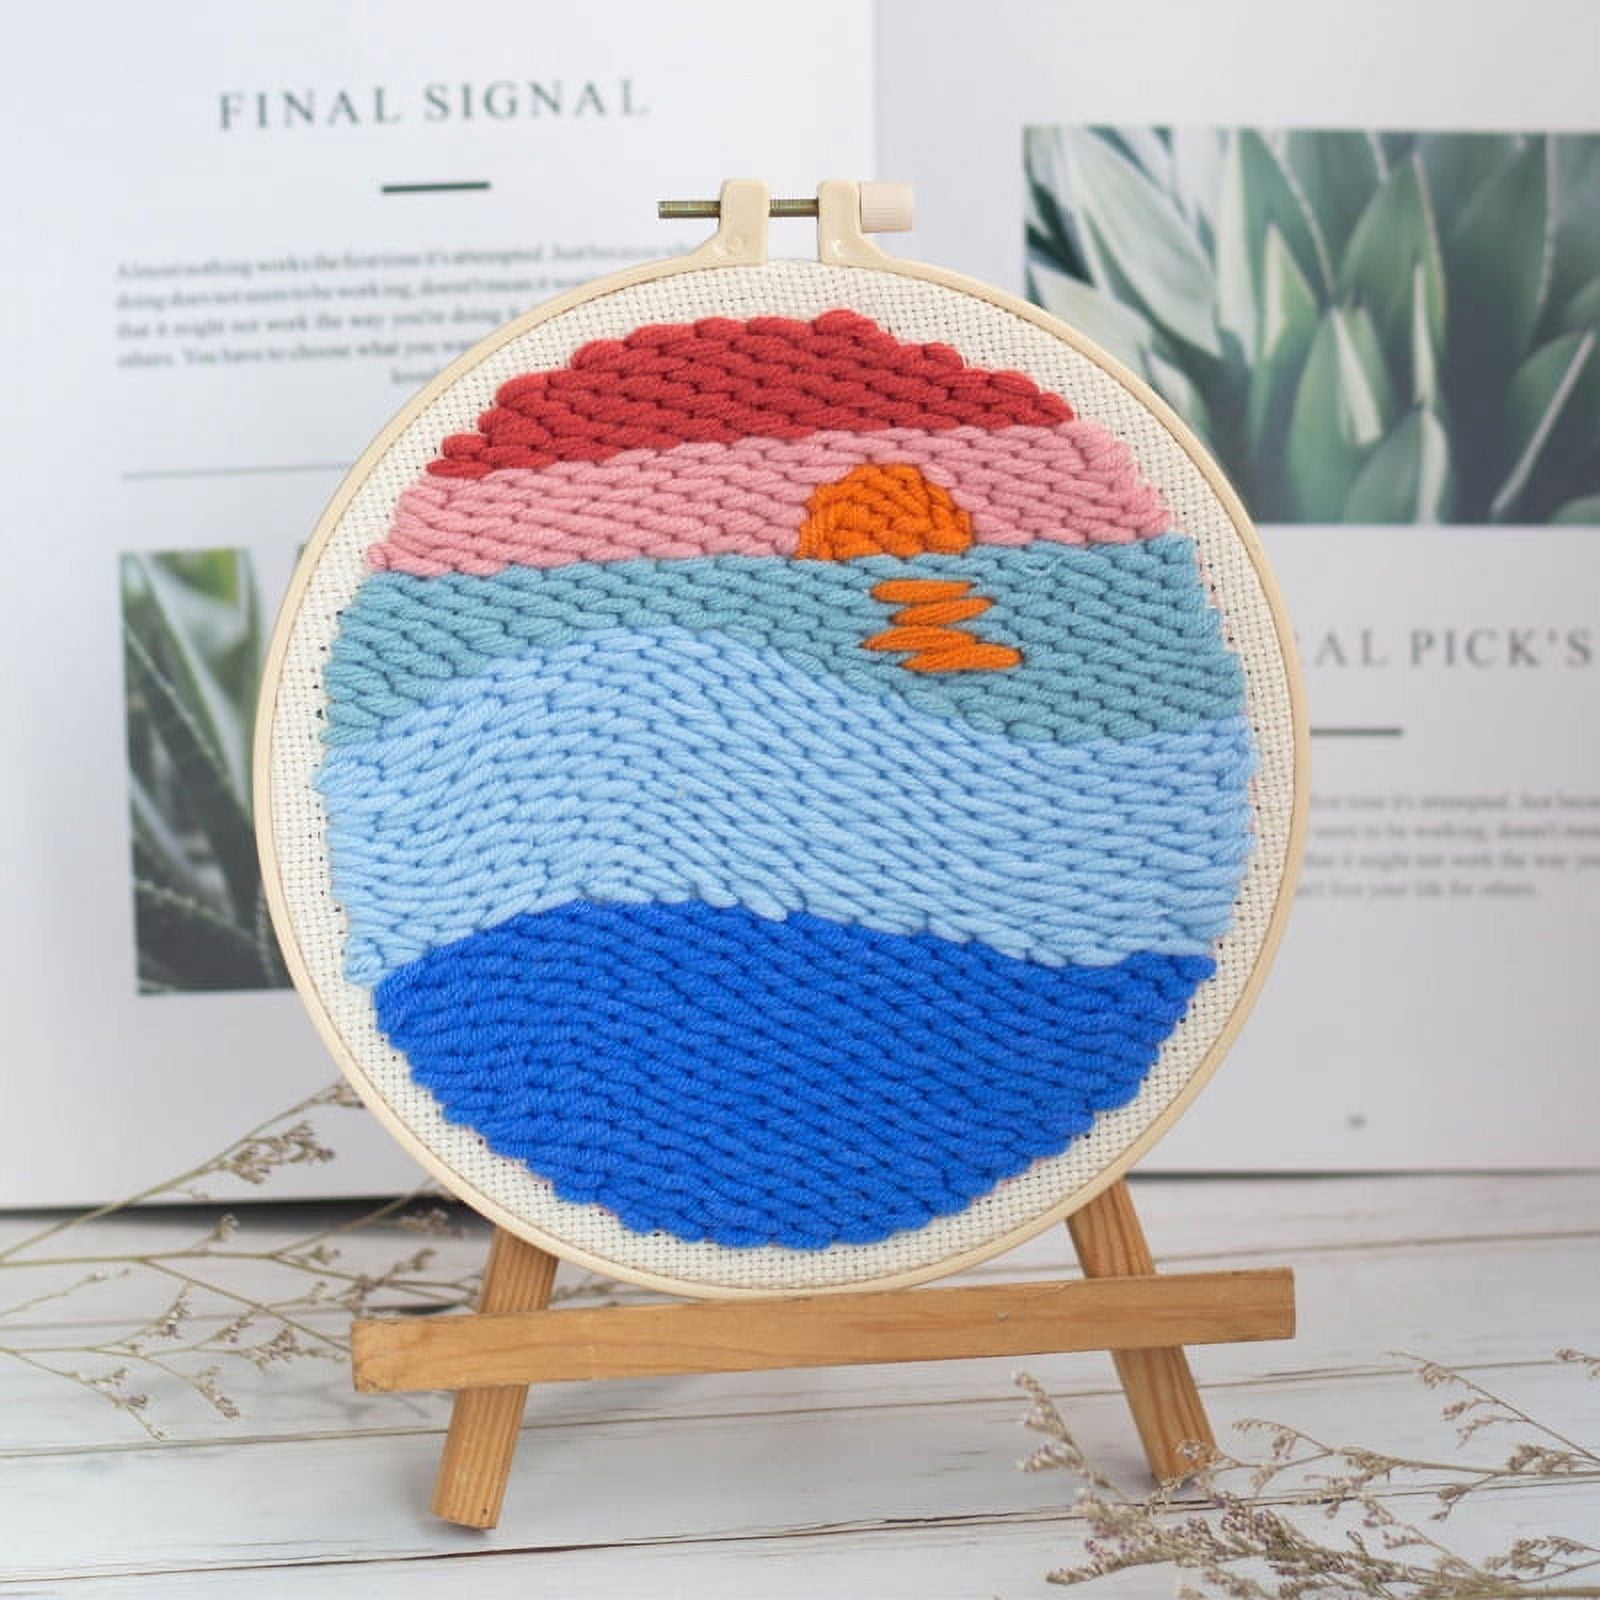 Other Arts And Crafts Cartoon Punch Needle Embroidery Kit With Yarn Easy  DIY Needlework Wool Work Home 50% More Woolen For Adult From Tttingber,  $33.13